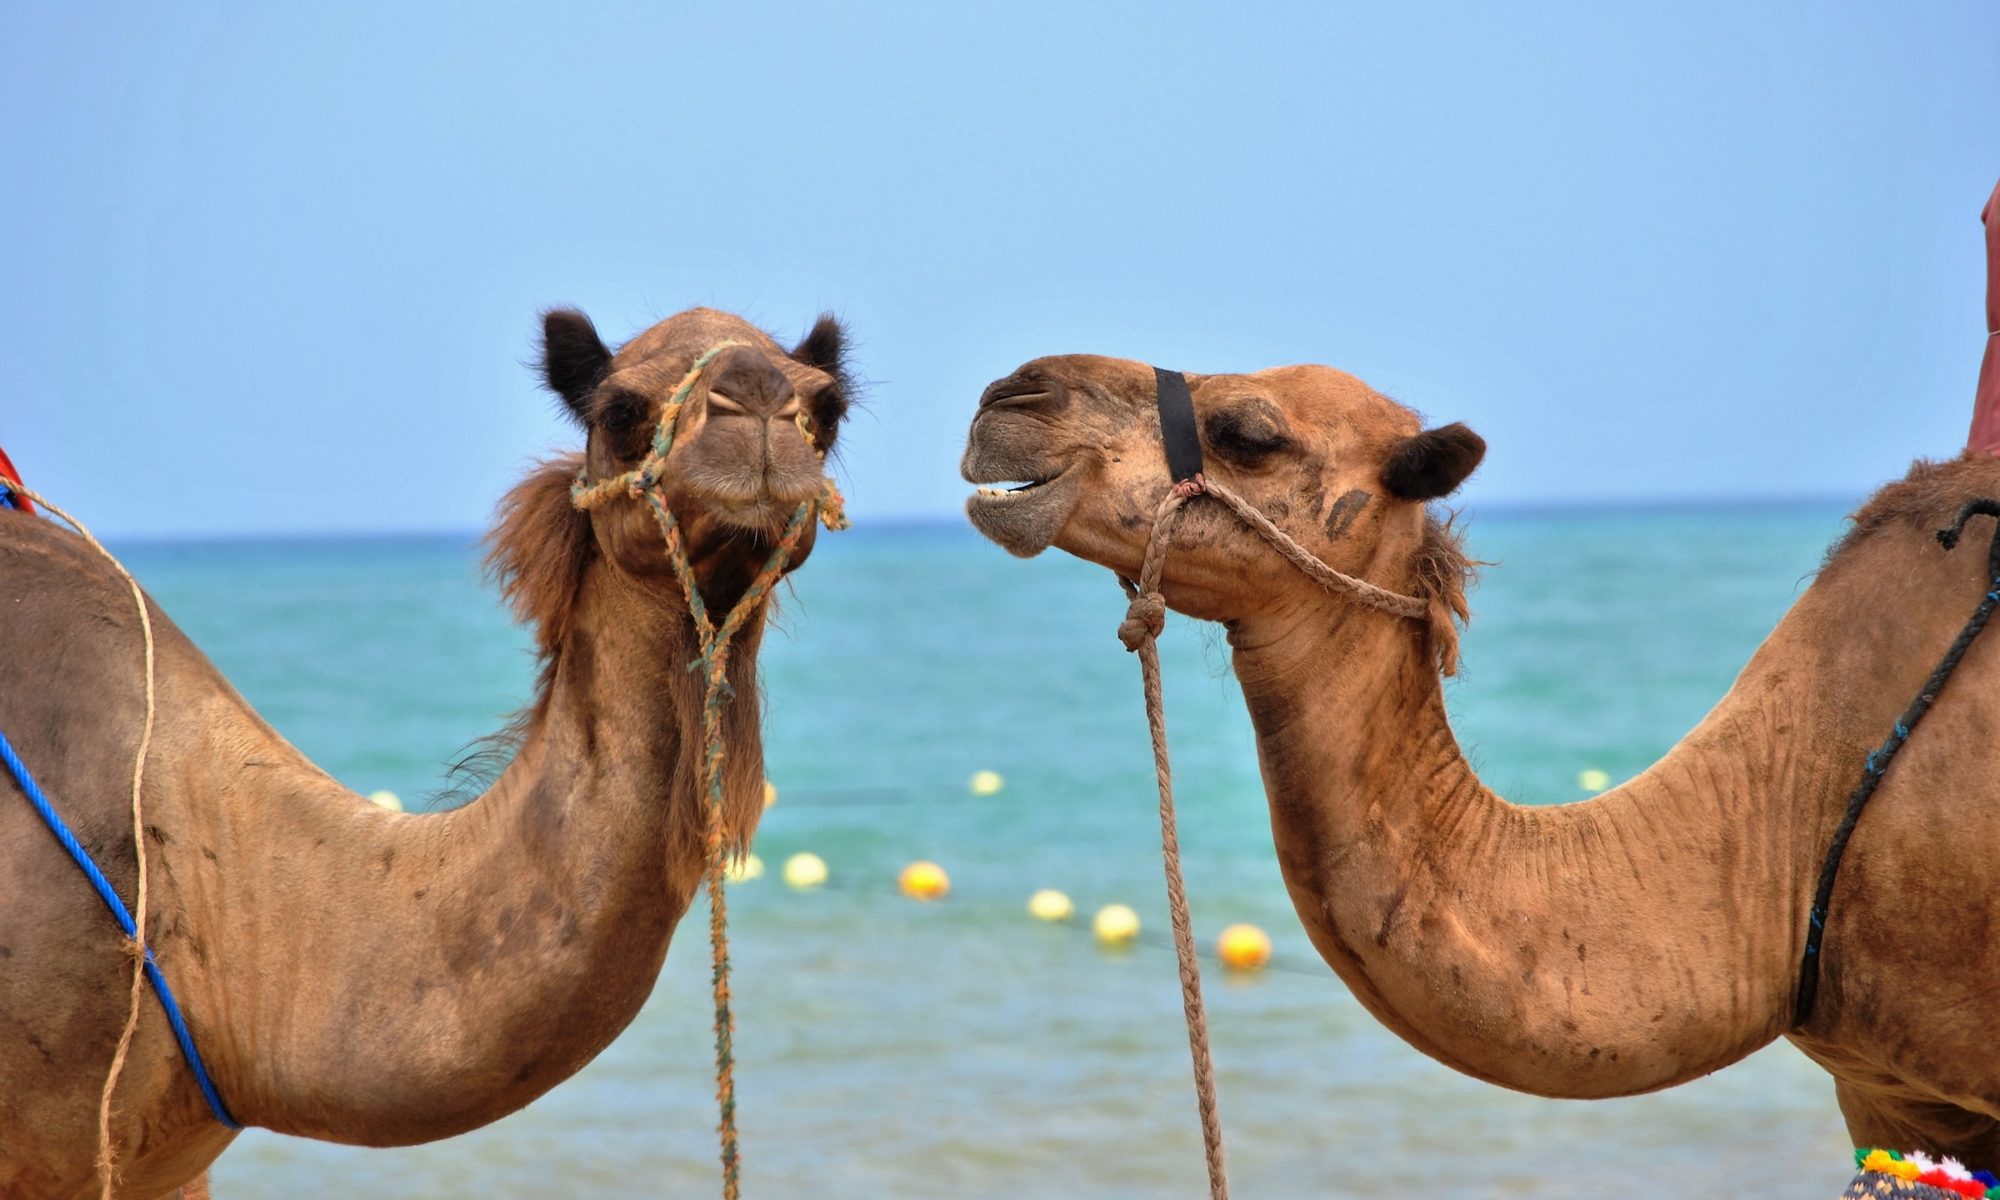 One camel staring at another camel, who is in existential distress